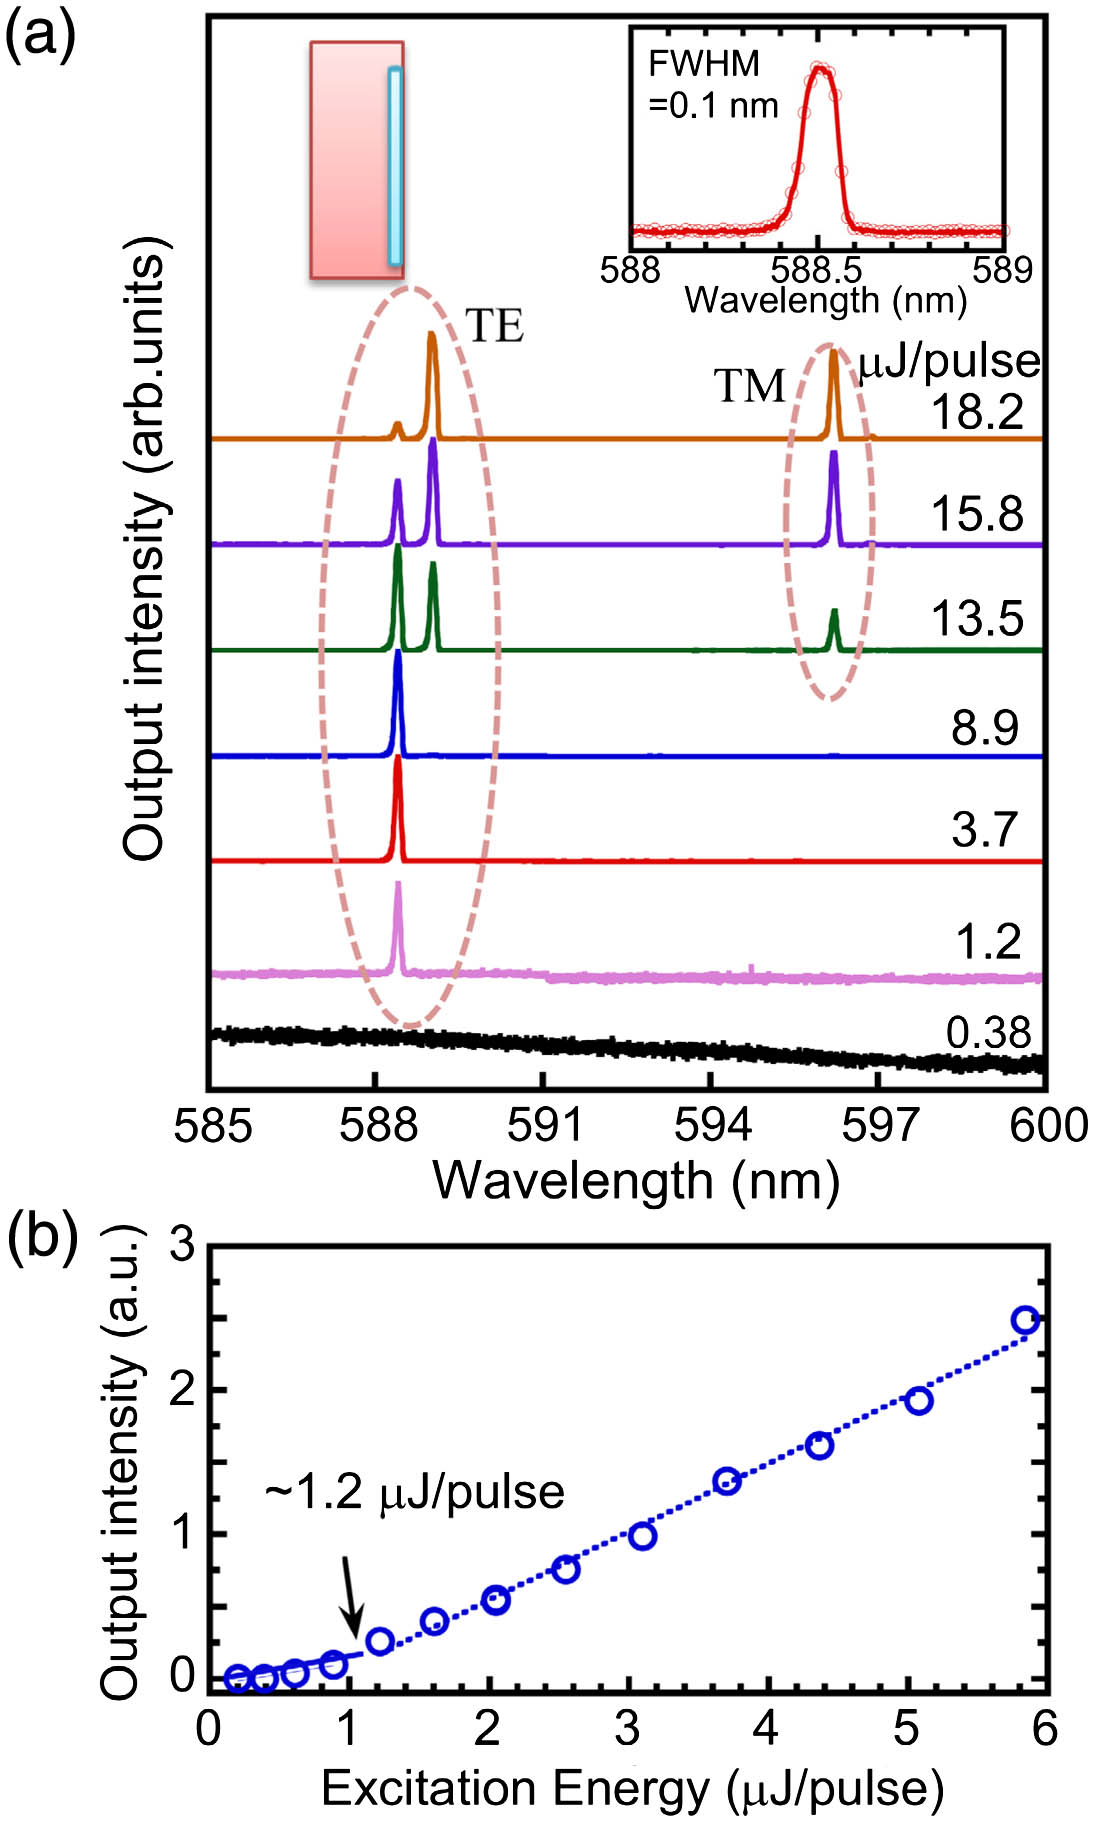 (a) Emission spectra of a 5 mg/mL Rh6G ethanol solution with a fiber at various excitation intensities. Left inset: sample configuration; the bare fiber rests on the cuvette wall vertically by capillary force. Right inset: emission spectrum excited at 3.7 μJ/pulse. TE, transverse electric; TM, transverse magnetic. (b) Integrated intensity of the emission as a function of excitation pulse energy, indicating a threshold behavior.